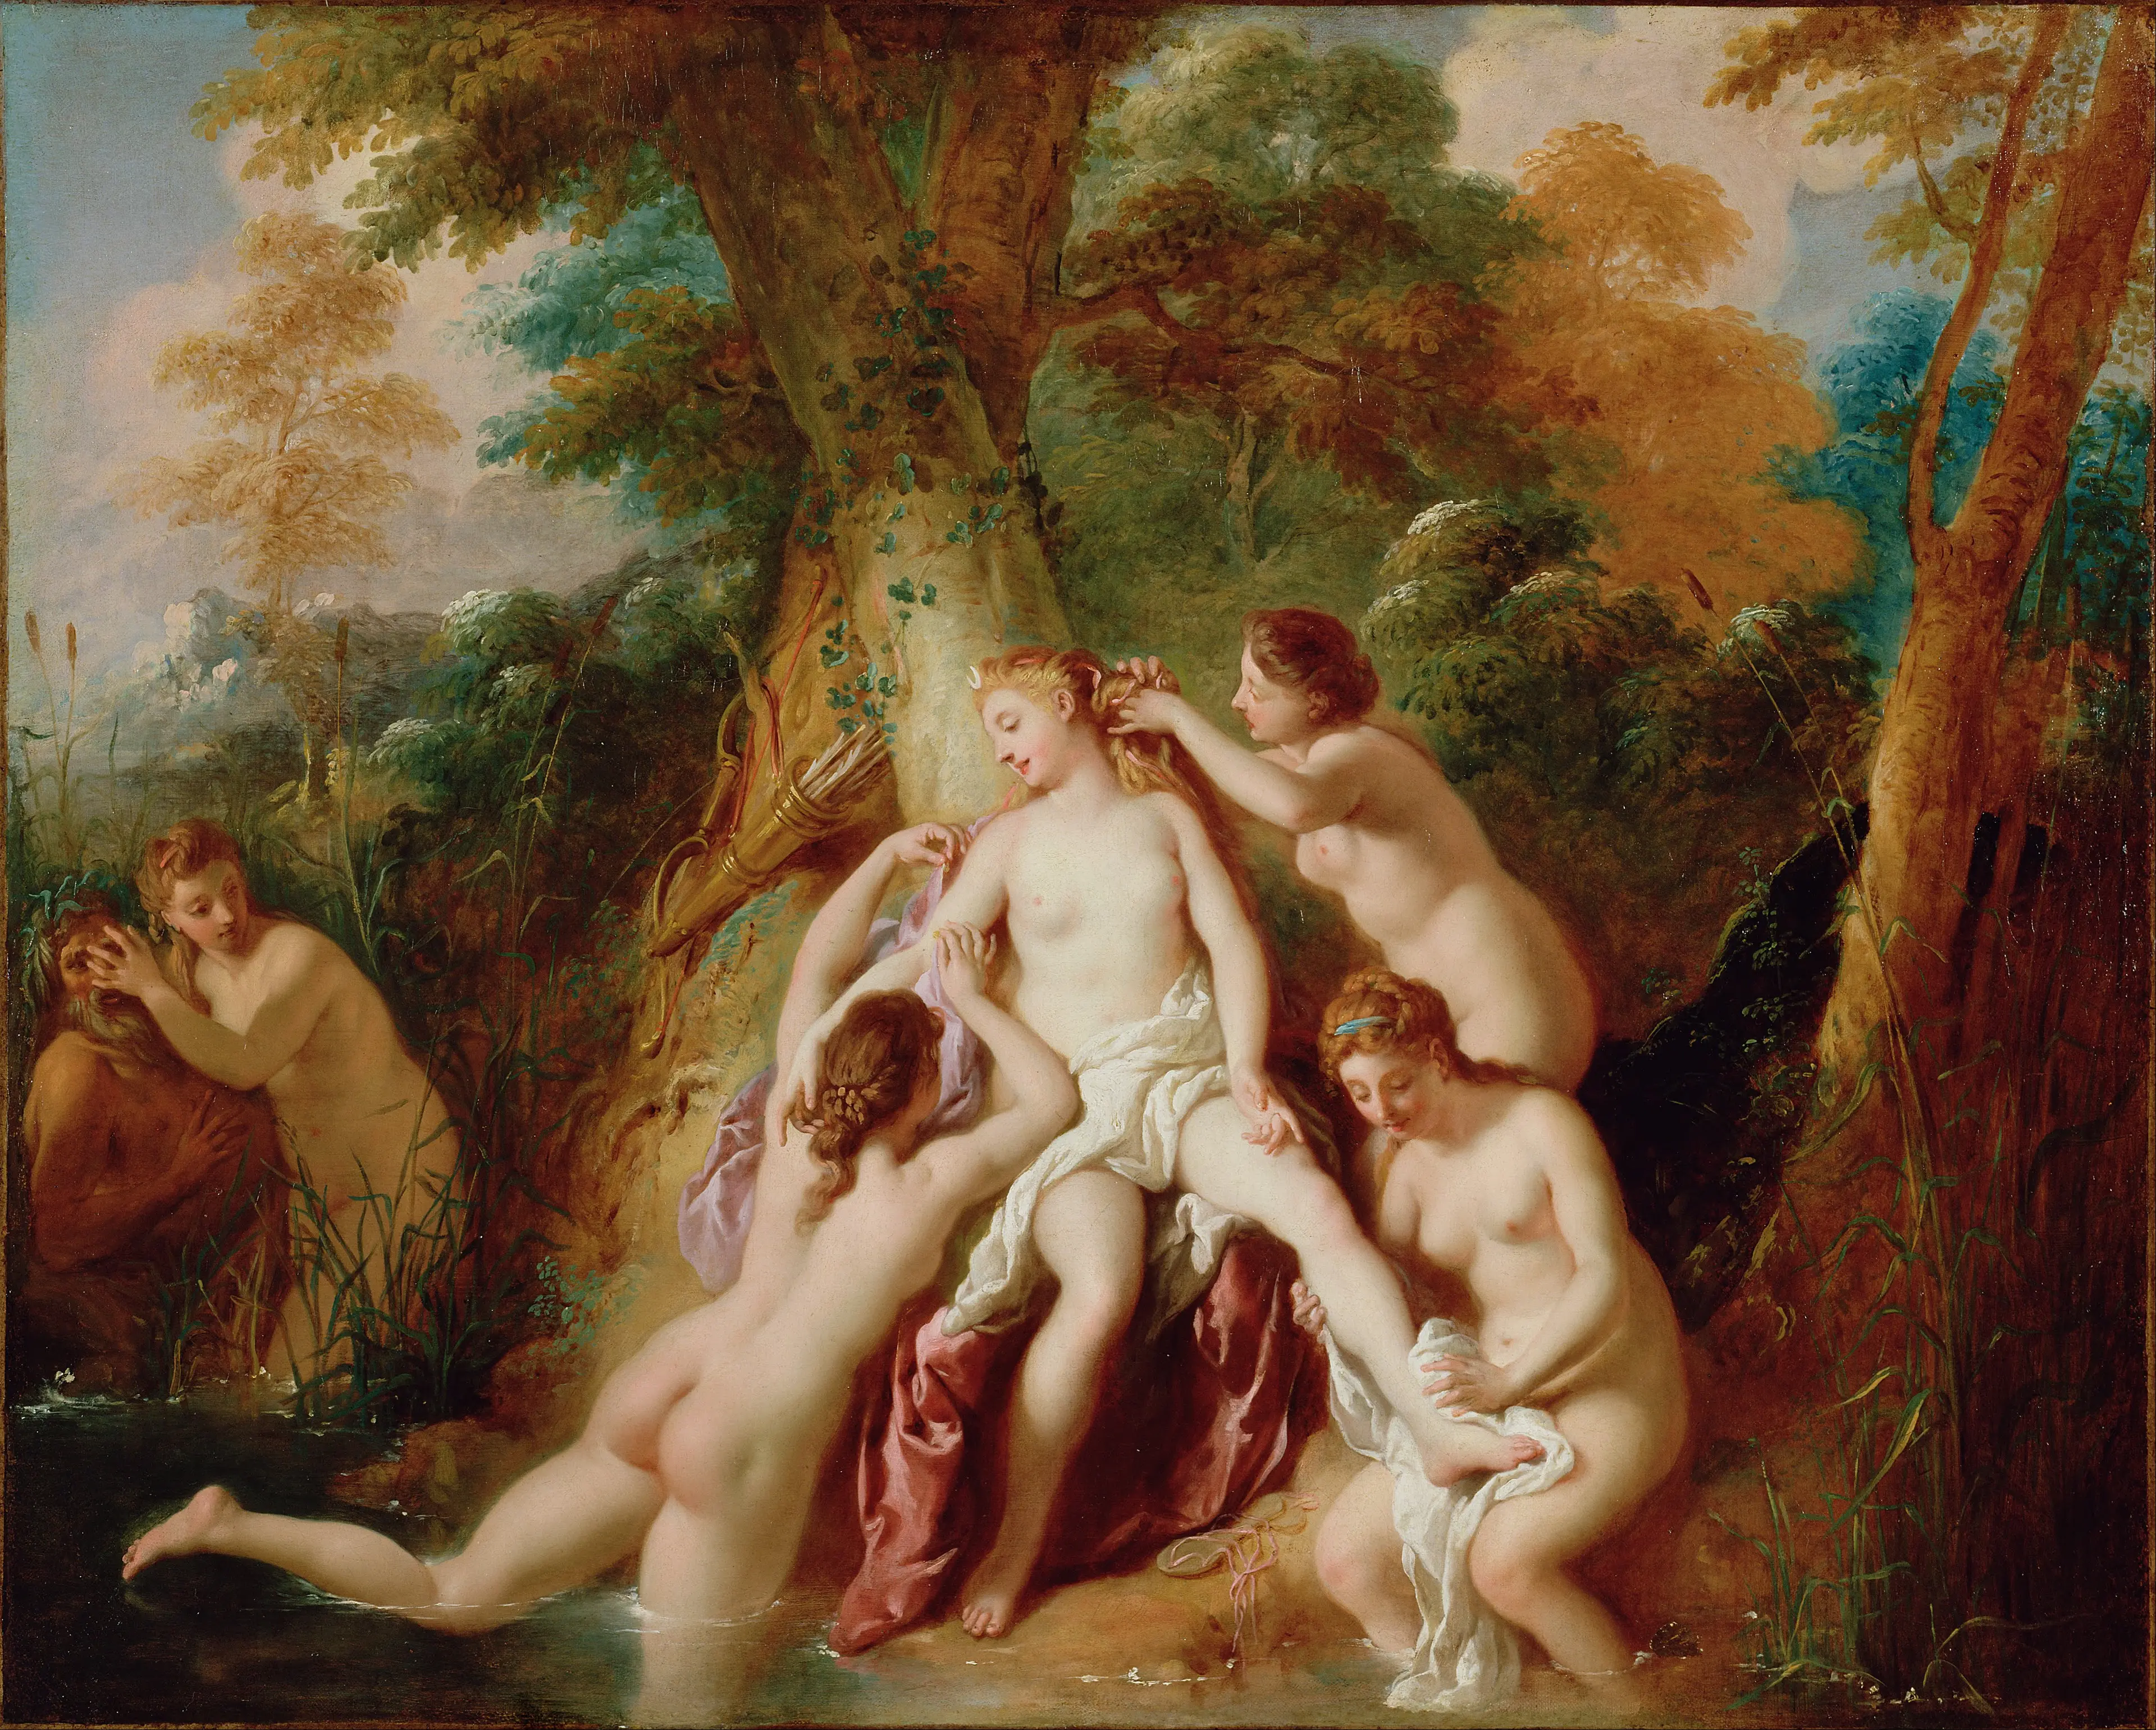 Diana and Her Nymphs Bathing